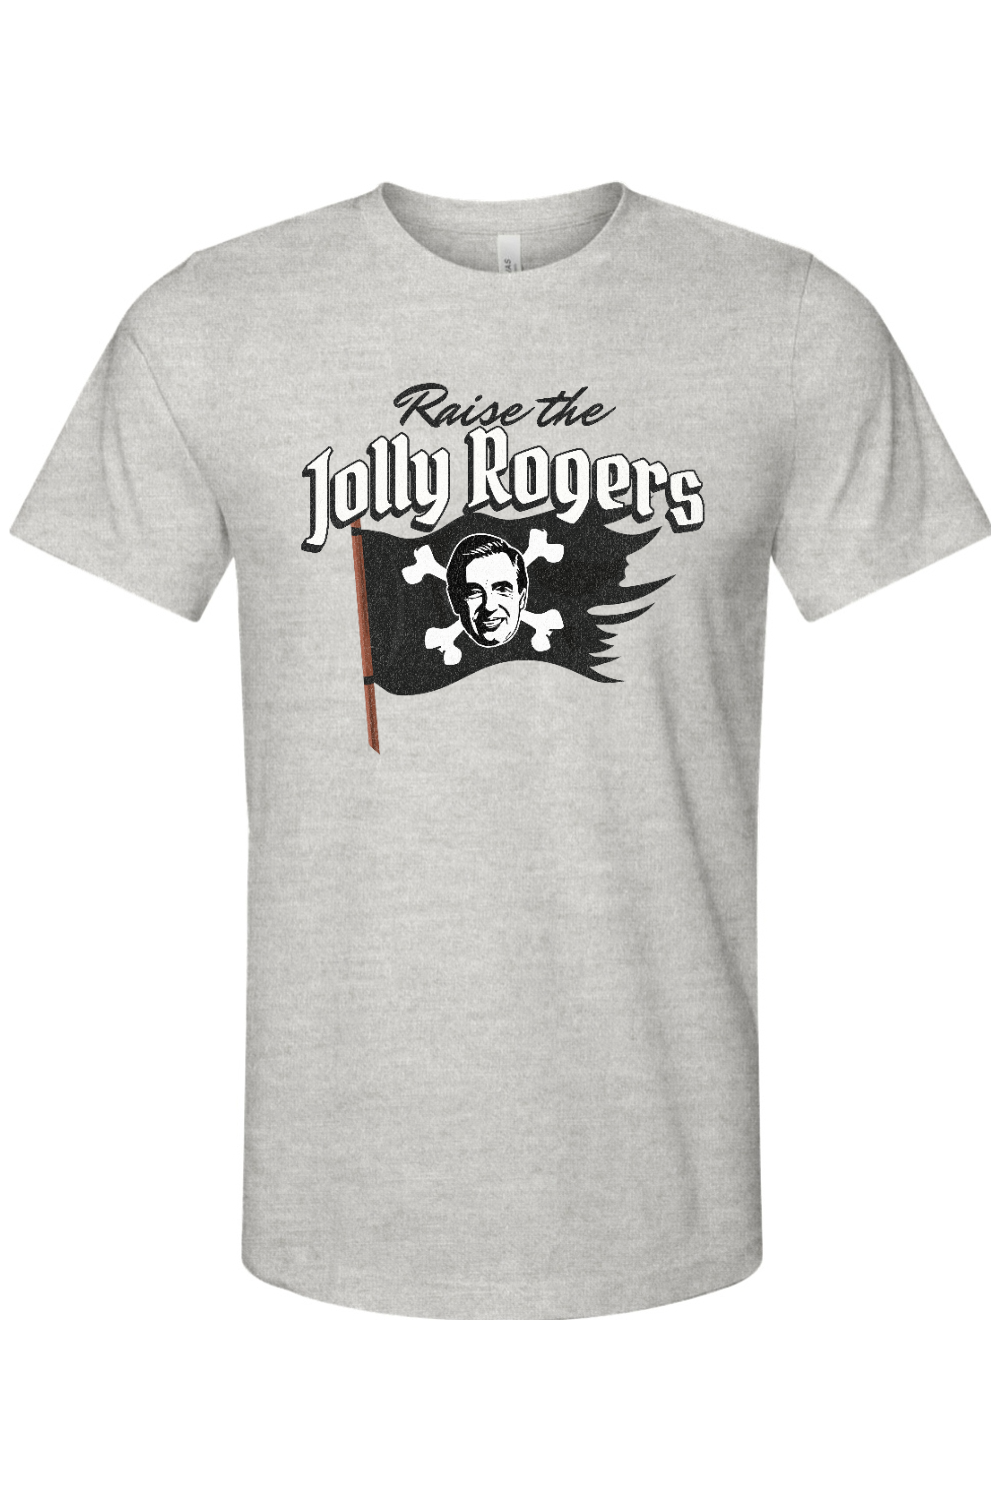 Pittsburgh Pirates MLB Raise The Jolly Roger White T-Shirt Size Large